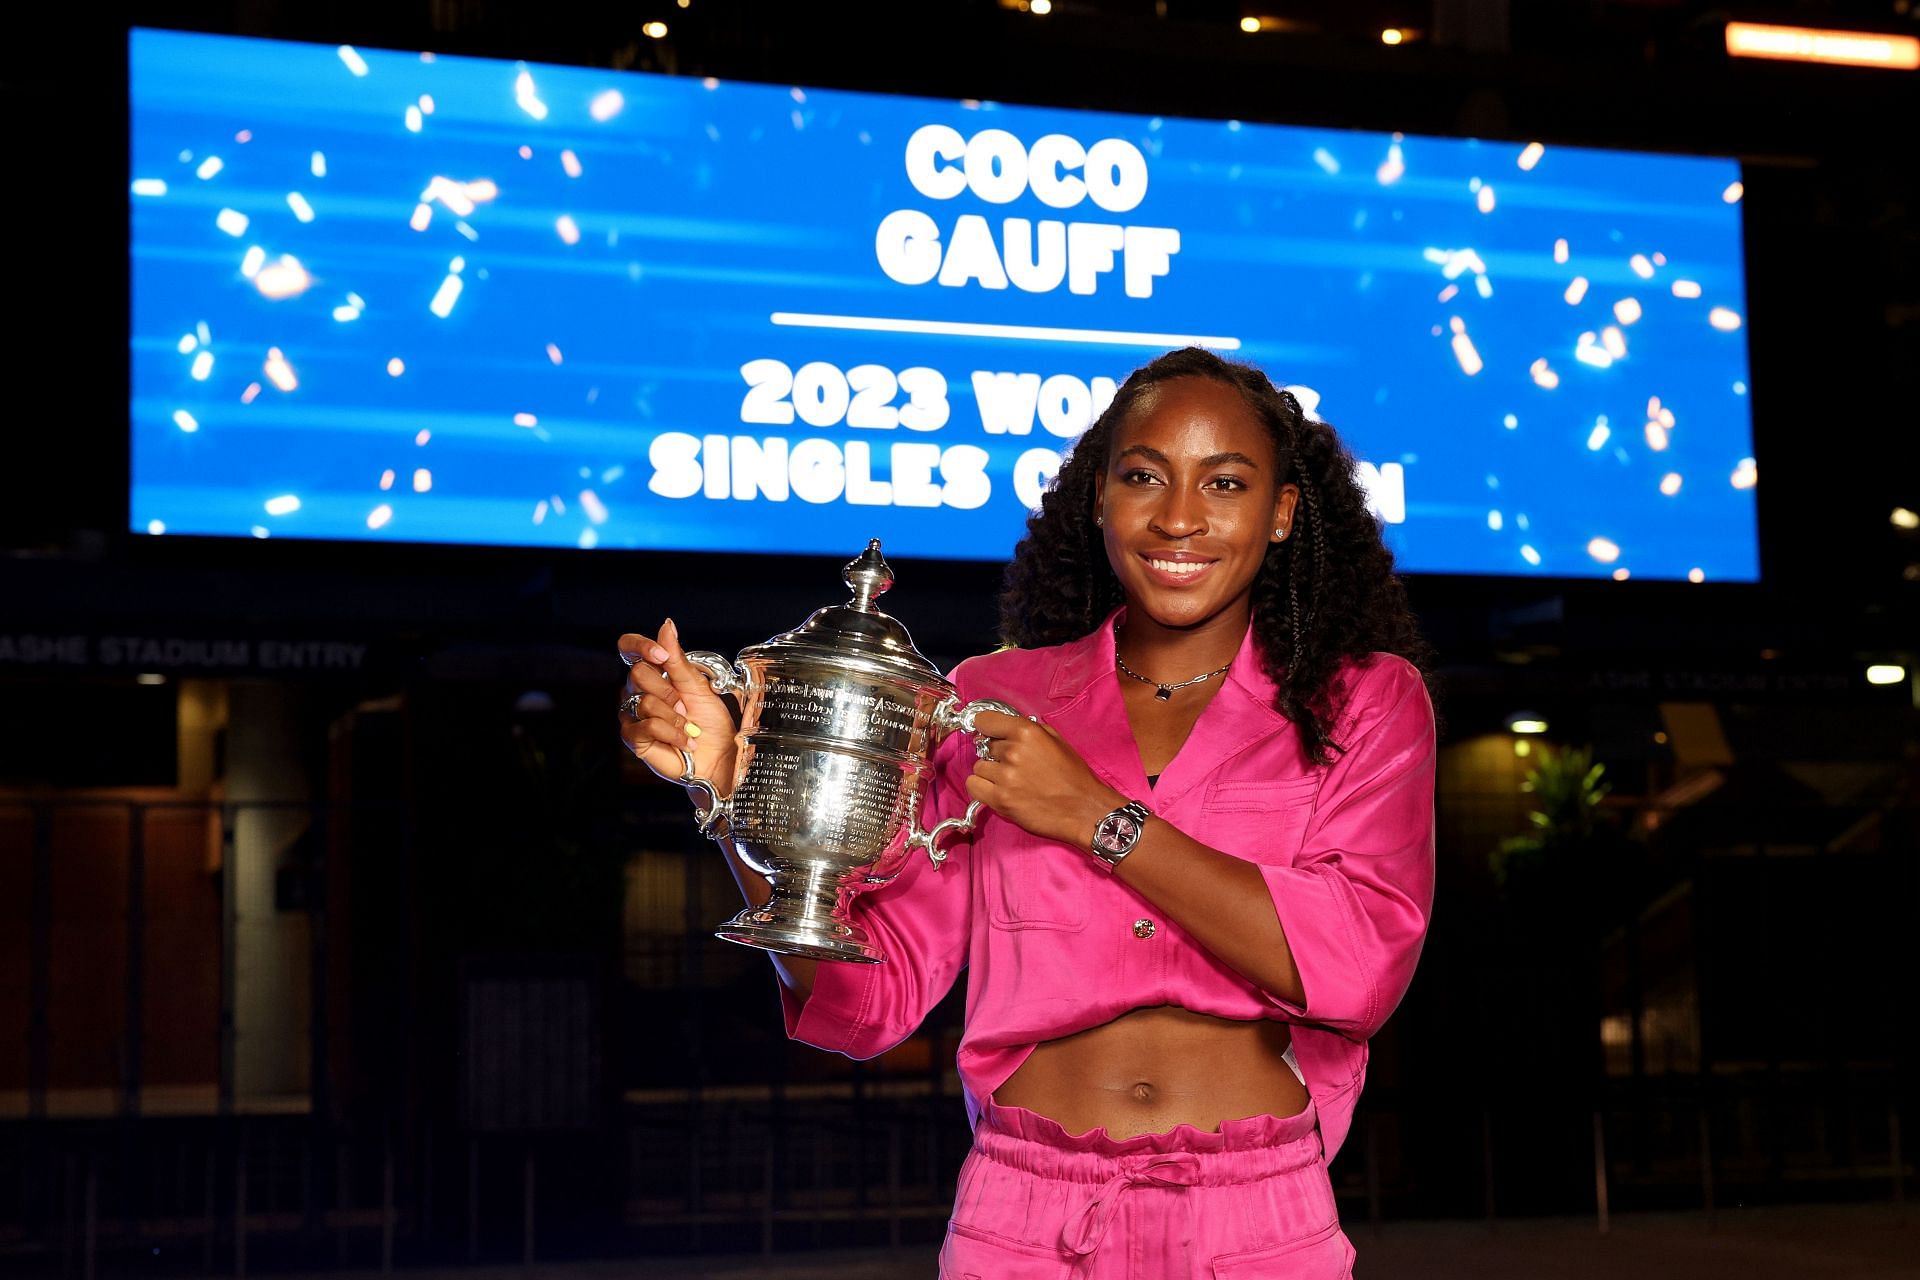 Coco Gauff pictured after winning 2023 US Open